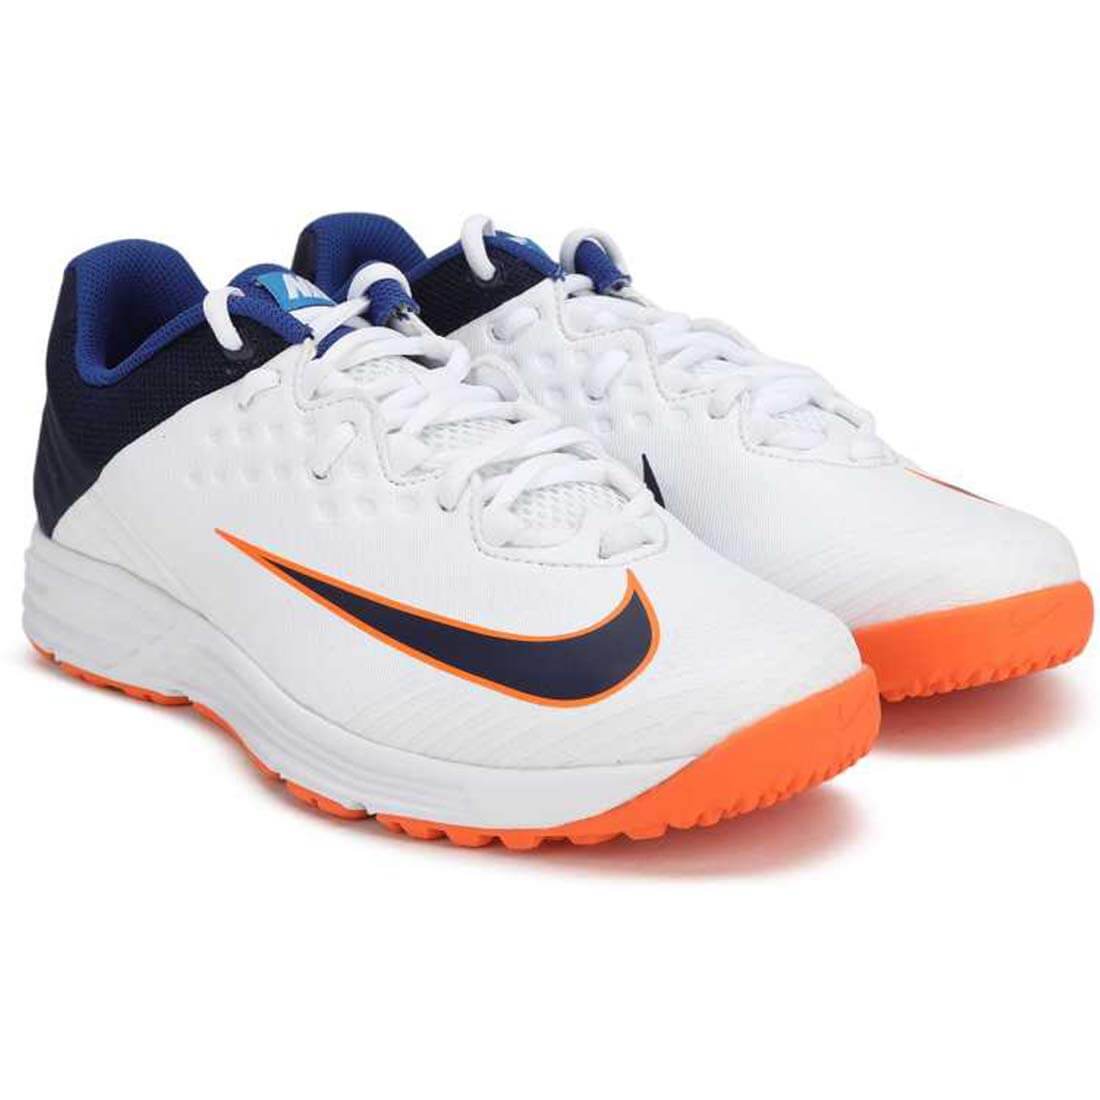 NIKE Potential 3 cricket Shoes